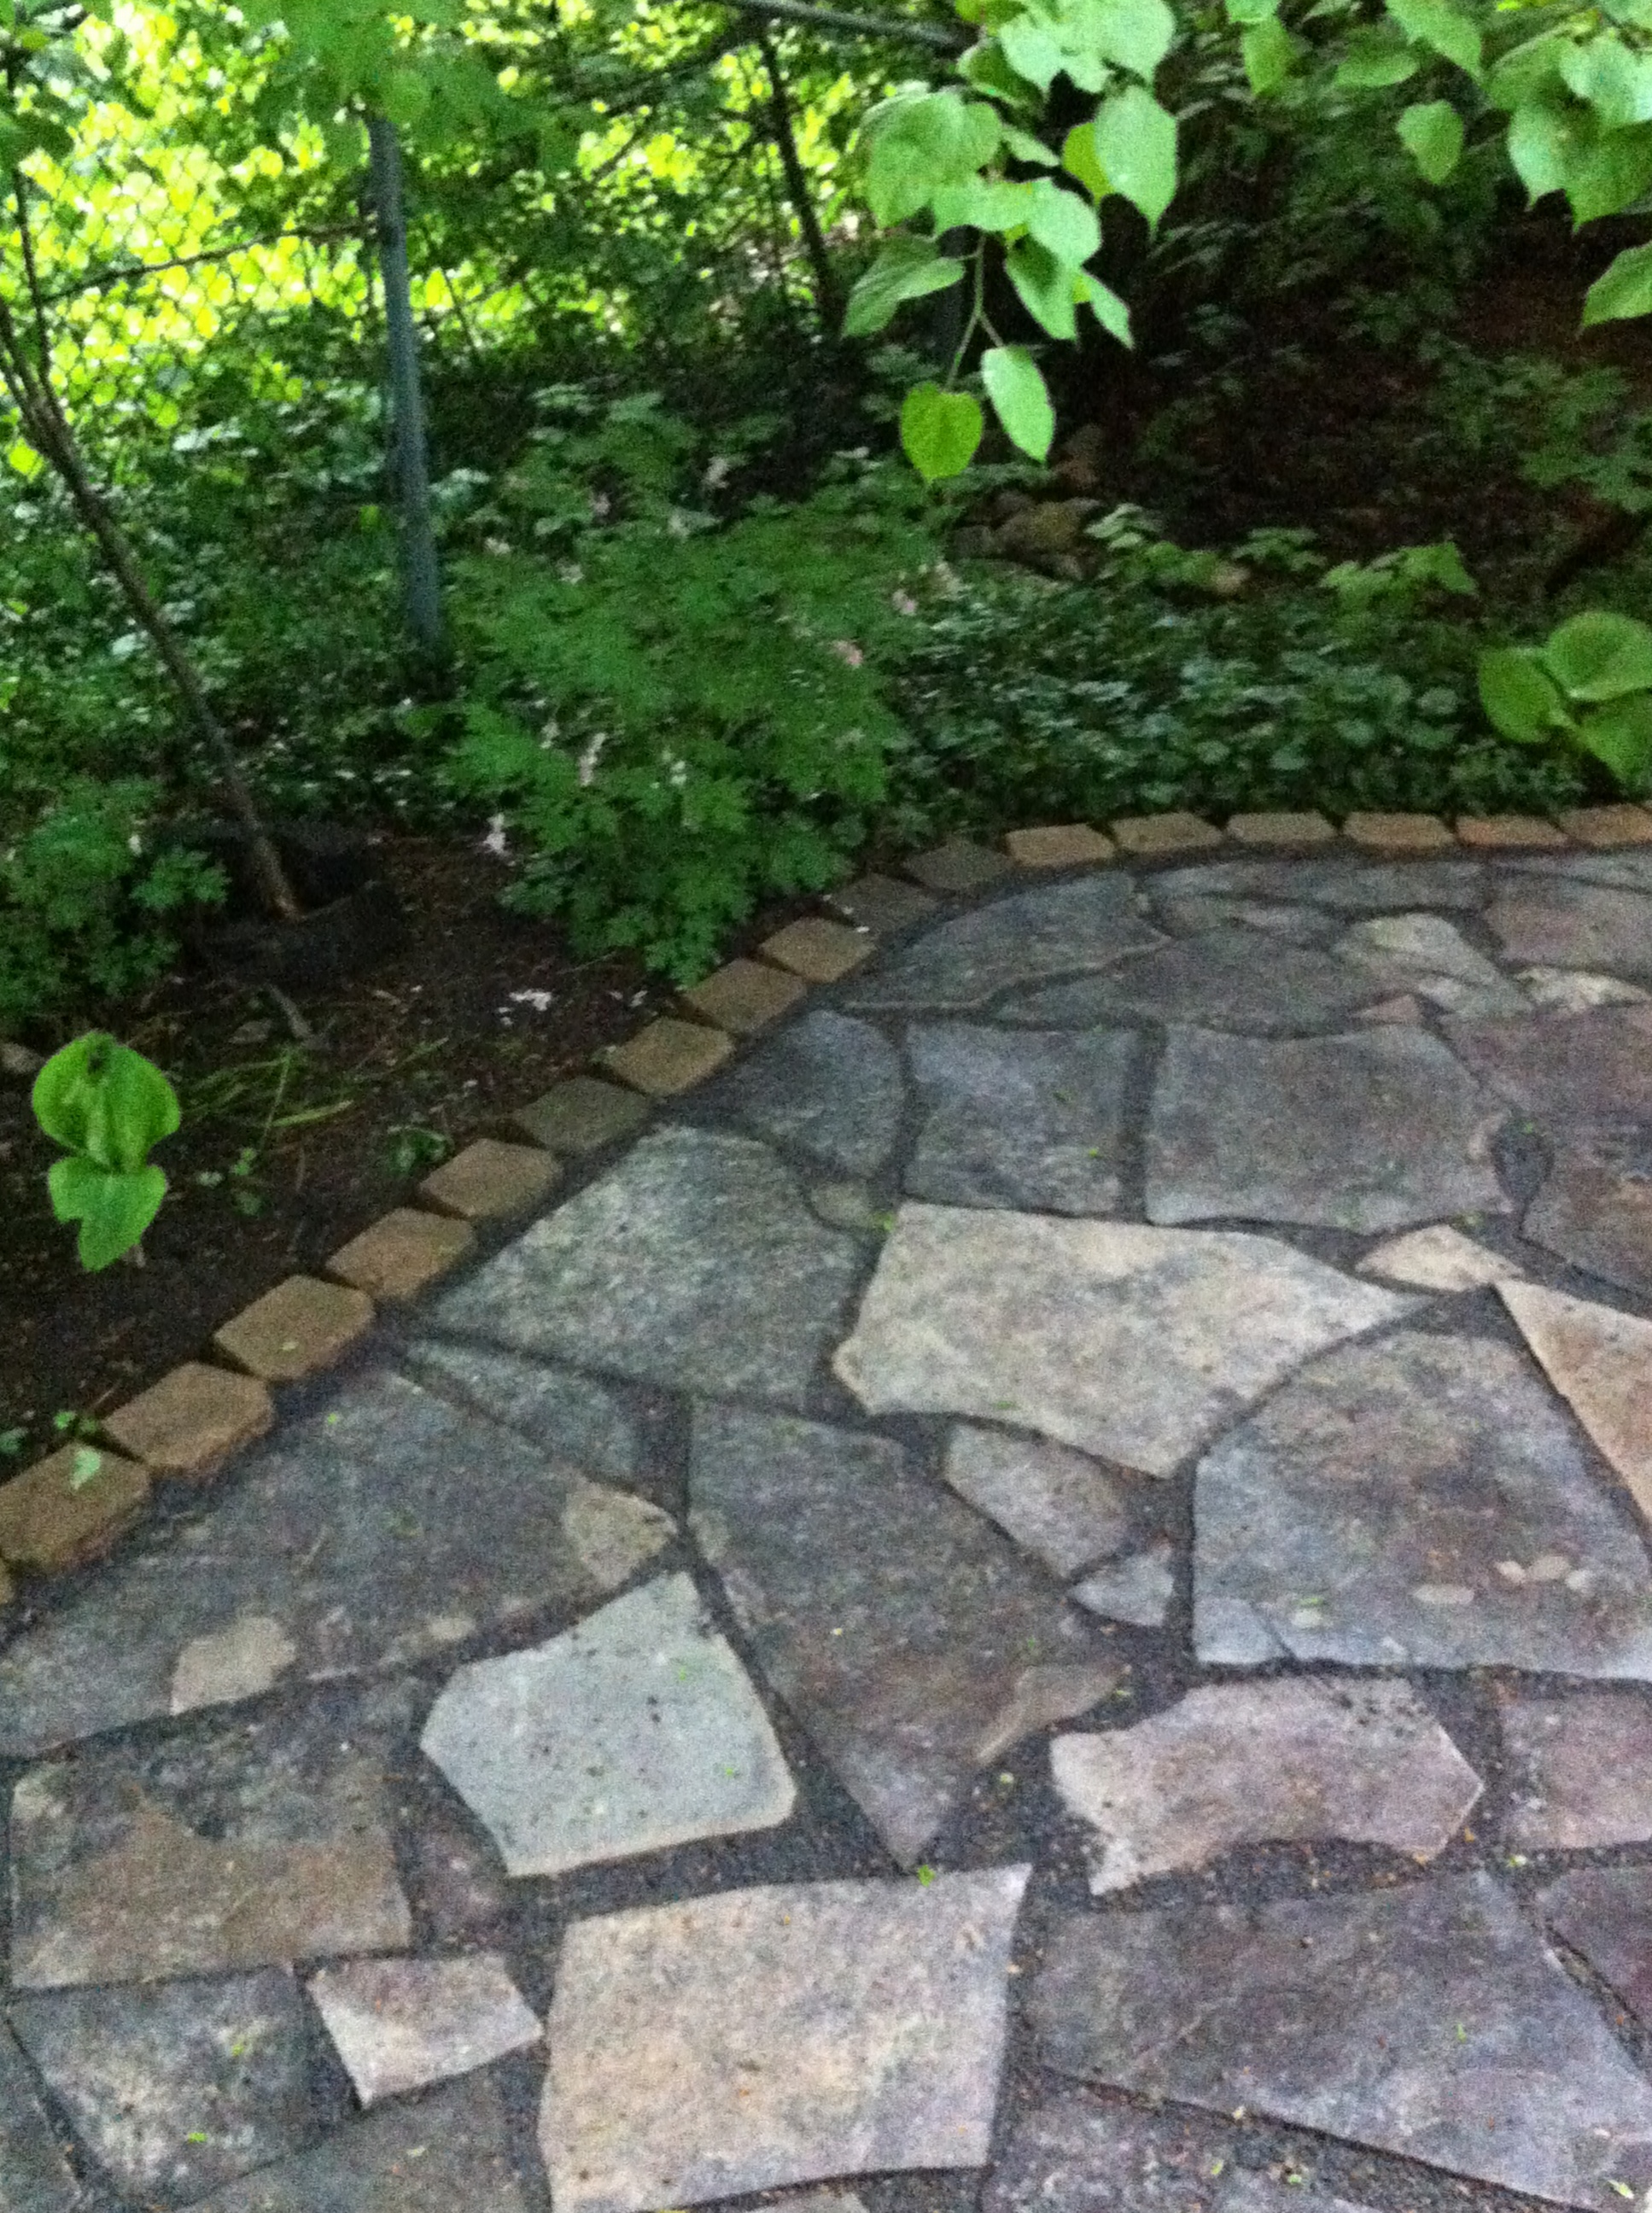 We worked carefully around trees, shrubs and ground cover. I also added some Hostas and other shade-loving plants.